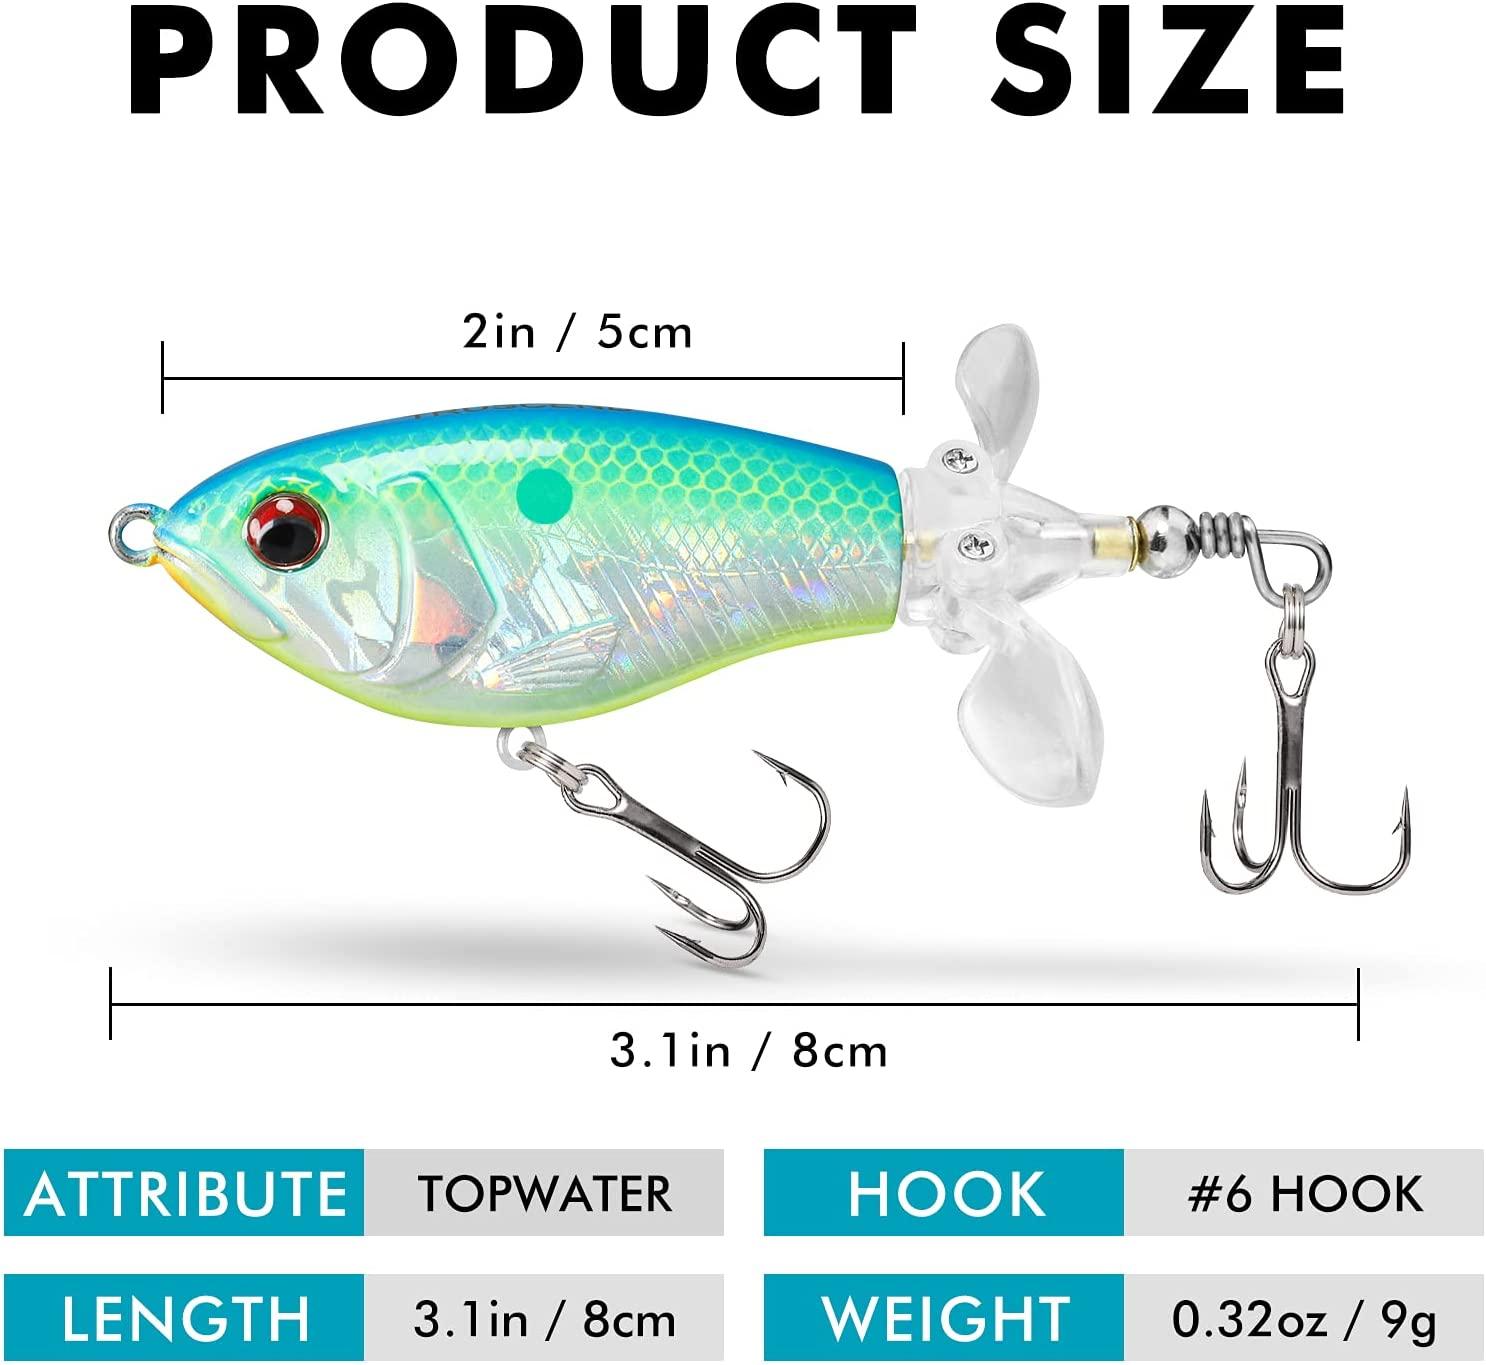 TRUSCEND Topwater Fishing Lures Whopper Fishing Lure with BKK Hooks  Floating Minnow Baits with Rotating Tail Top Water Pencil Lures for Trout  Pike Perch Surface Bass Lures Freshwater Saltwater B-30.3oz